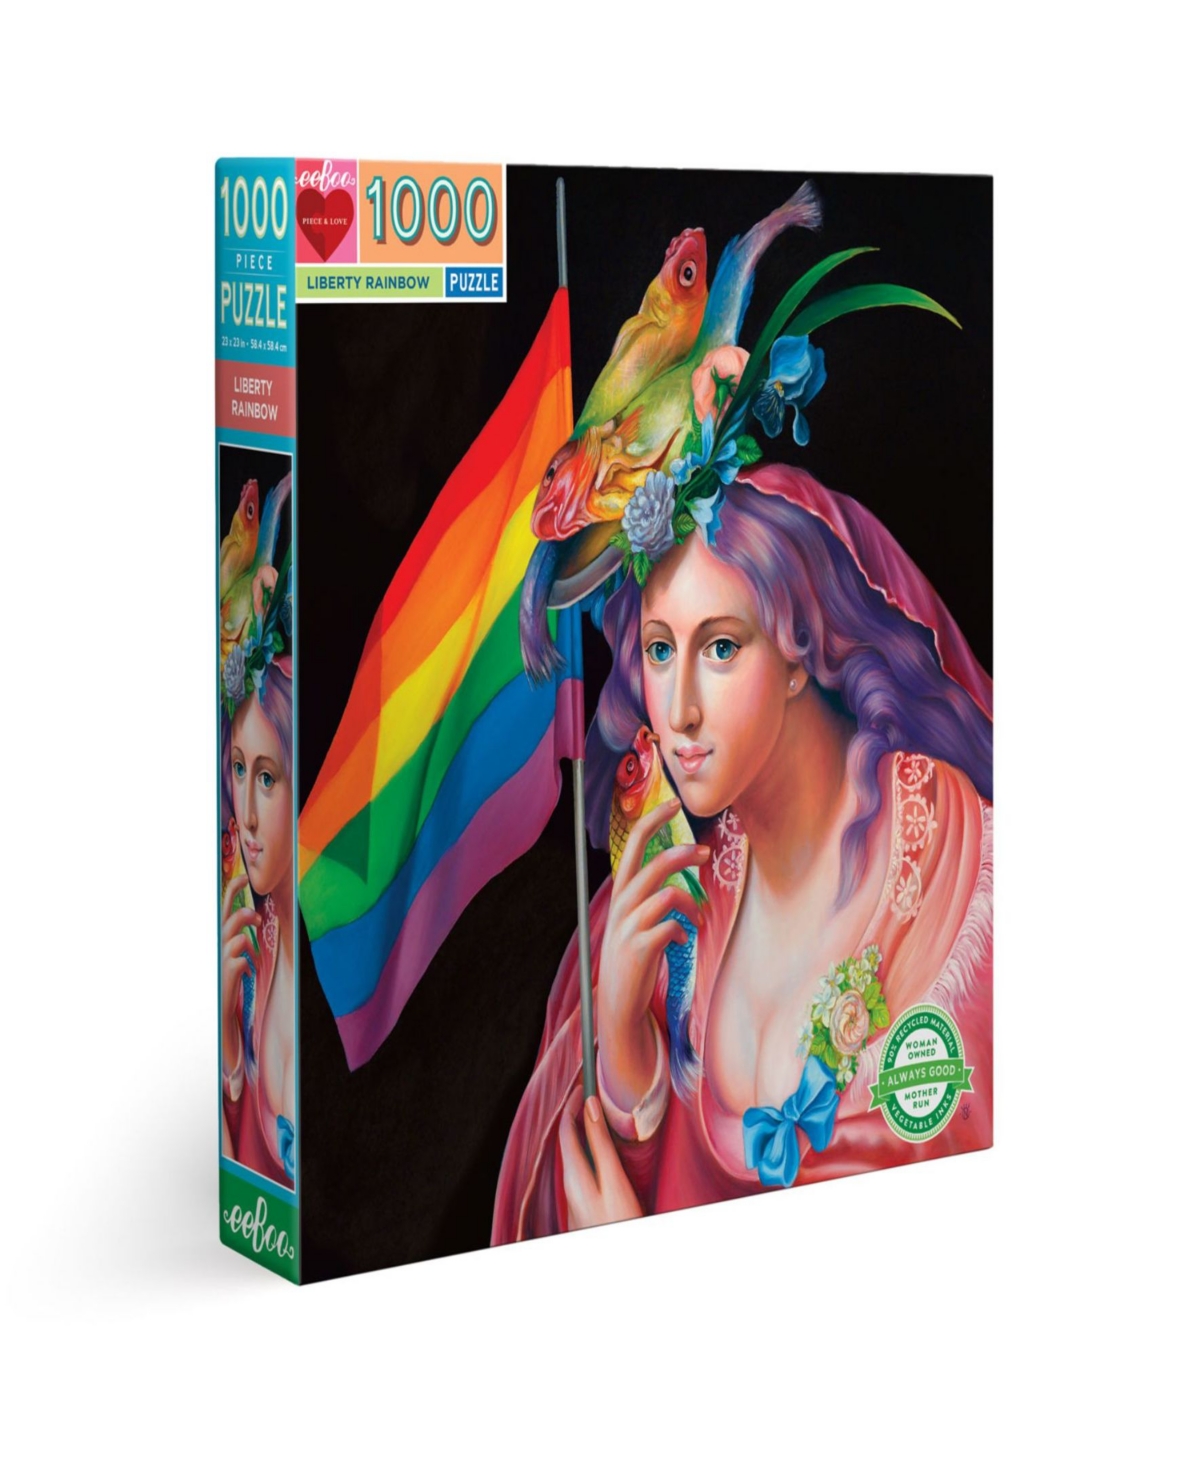 Eeboo Piece And Love Liberty Rainbow 1000 Piece Square Adult Jigsaw Puzzle Set In Multi